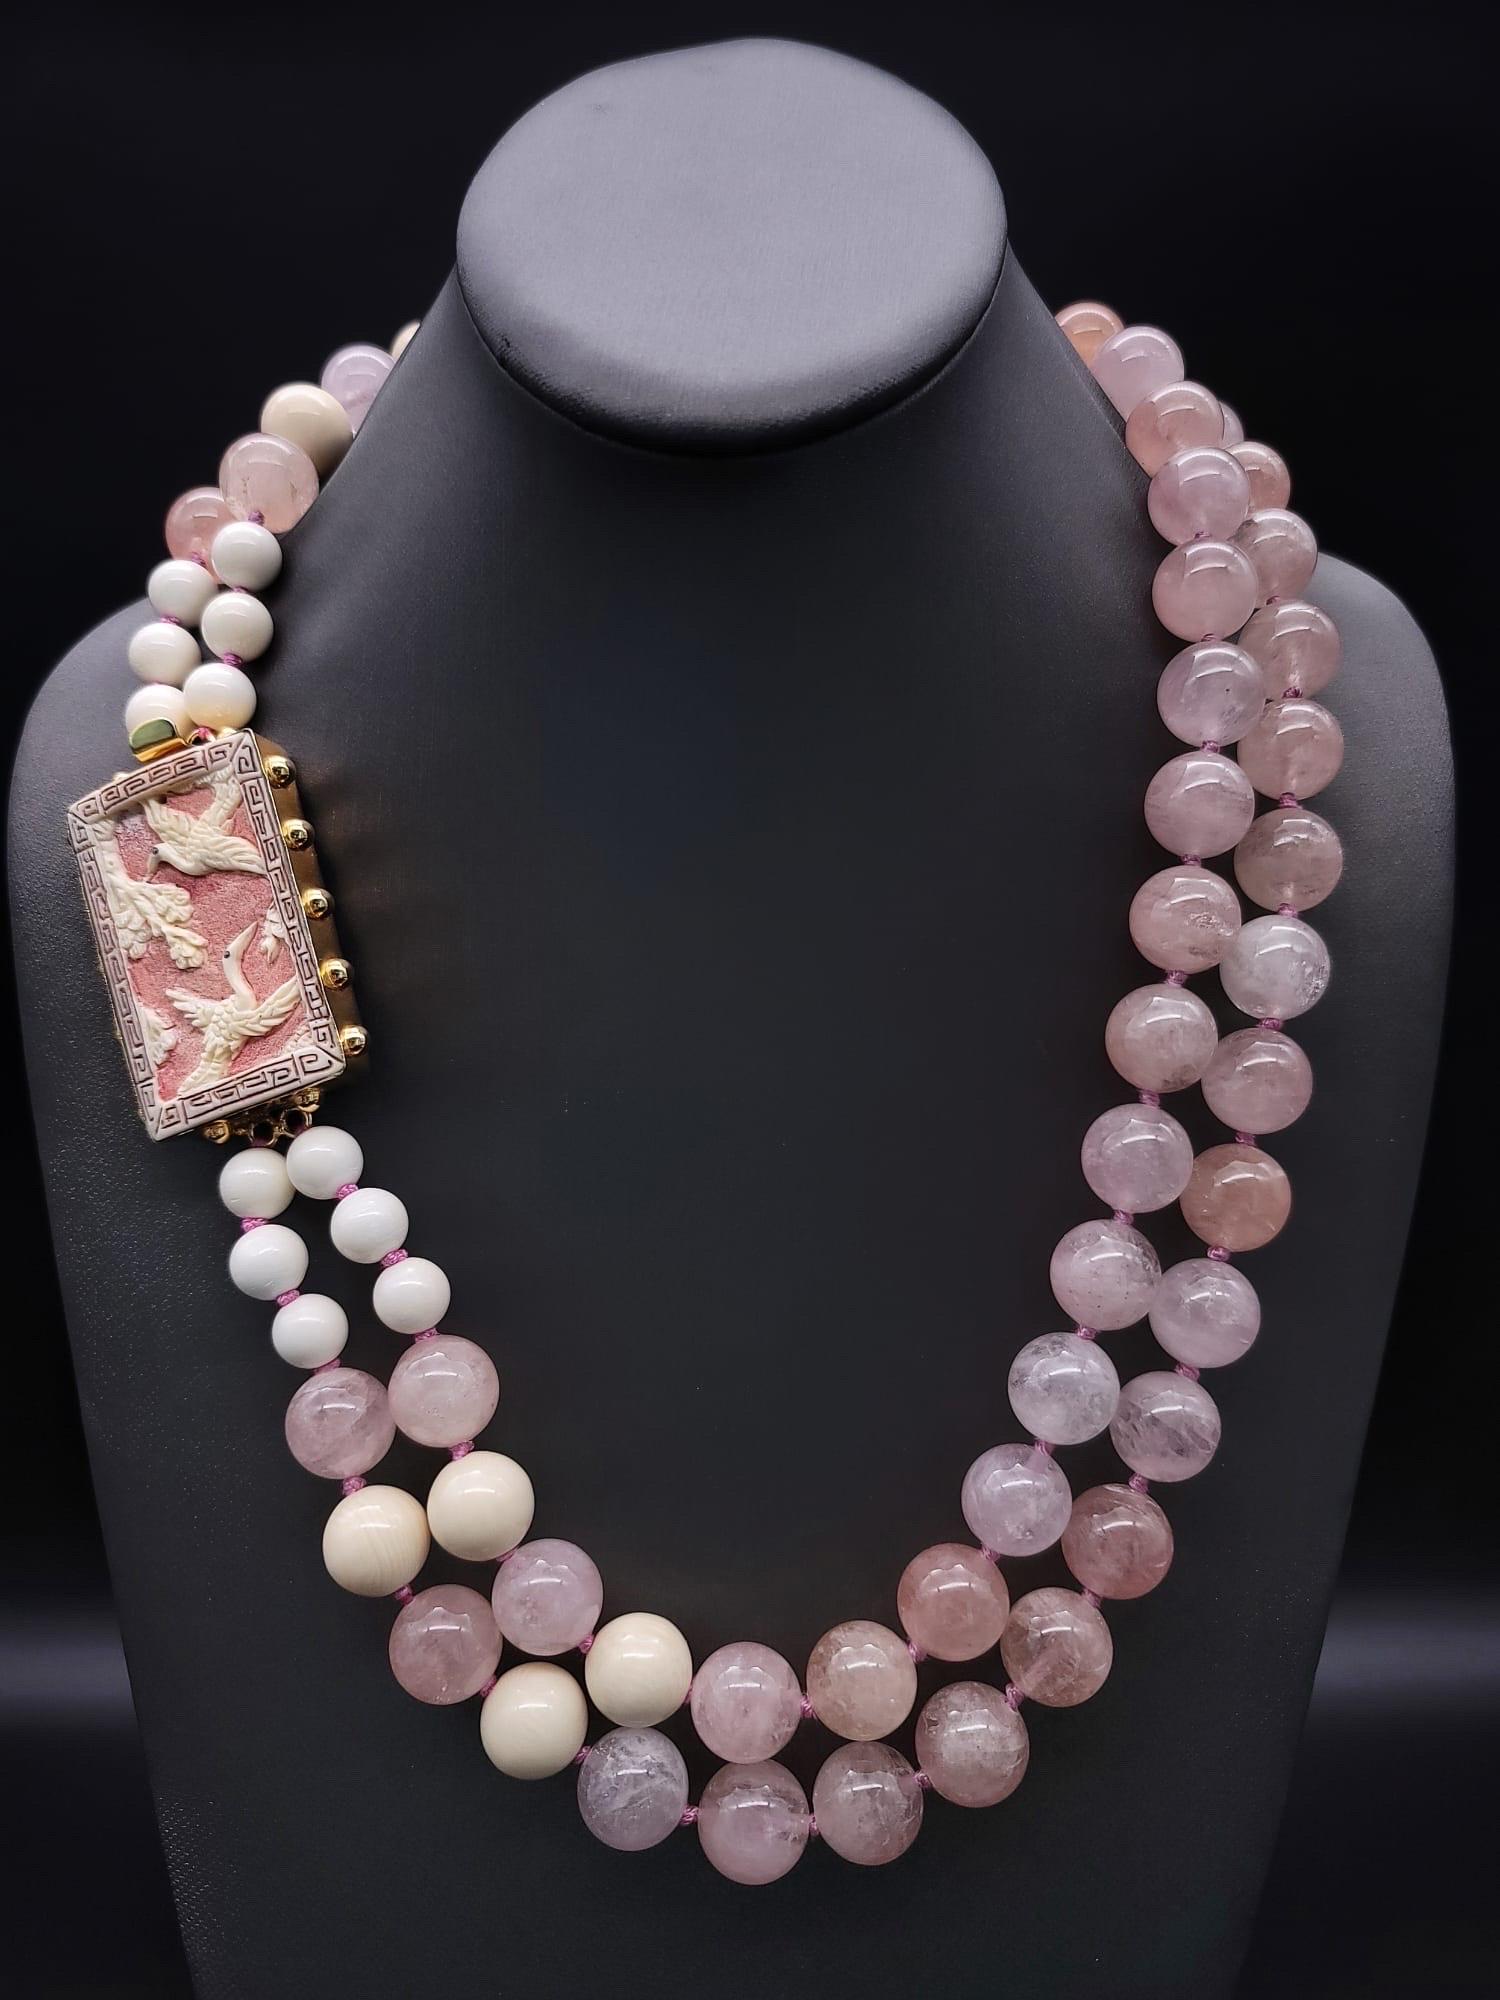 One-of-a-Kind

Beautiful 14-15 m.m Morganite beads in typical shadings from pink to apricot to salmon. 
Morganite is a lovely new stone. It was introduced in 2010 and has become a favorite quickly. Morganite is a Beryl as is aquamarine and emerald.